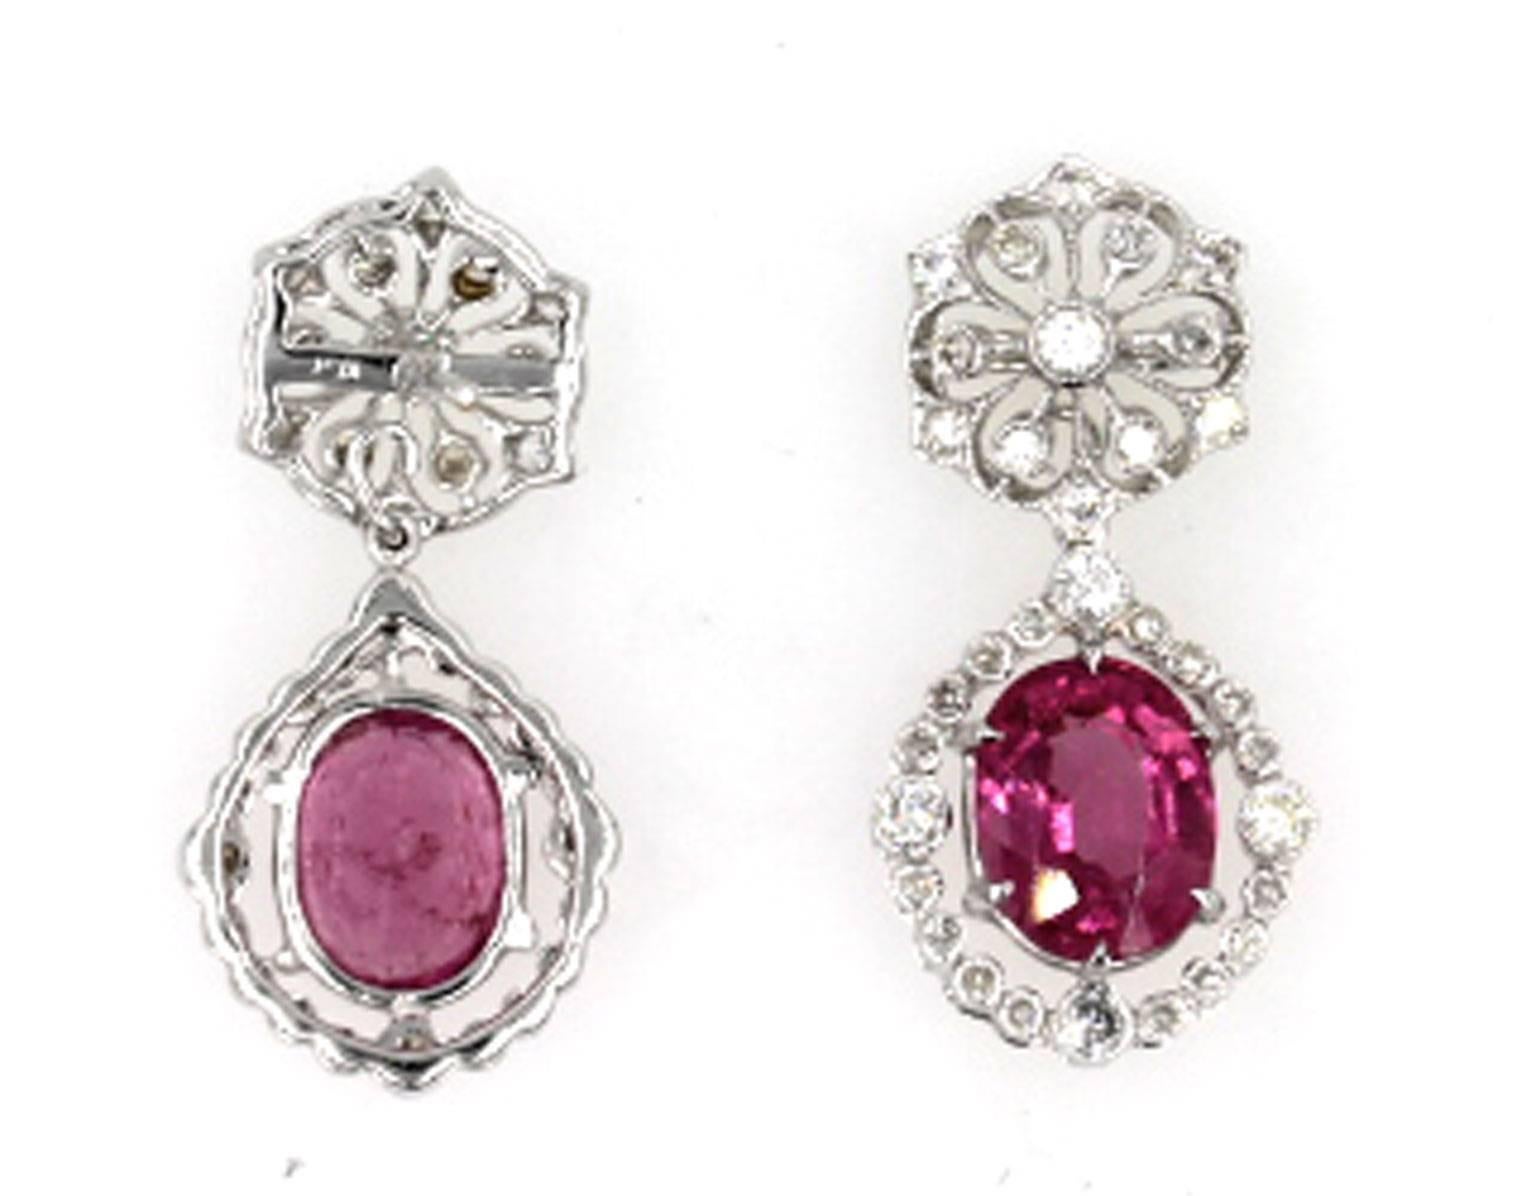 These brilliant diamond and pink tourmaline filigree earrings are fashioned in 18 karat white gold. There is approximately one carat total weight of diamonds in the filigree tops and surrounding the pink tourmalines. Each earring is 1 inch long and